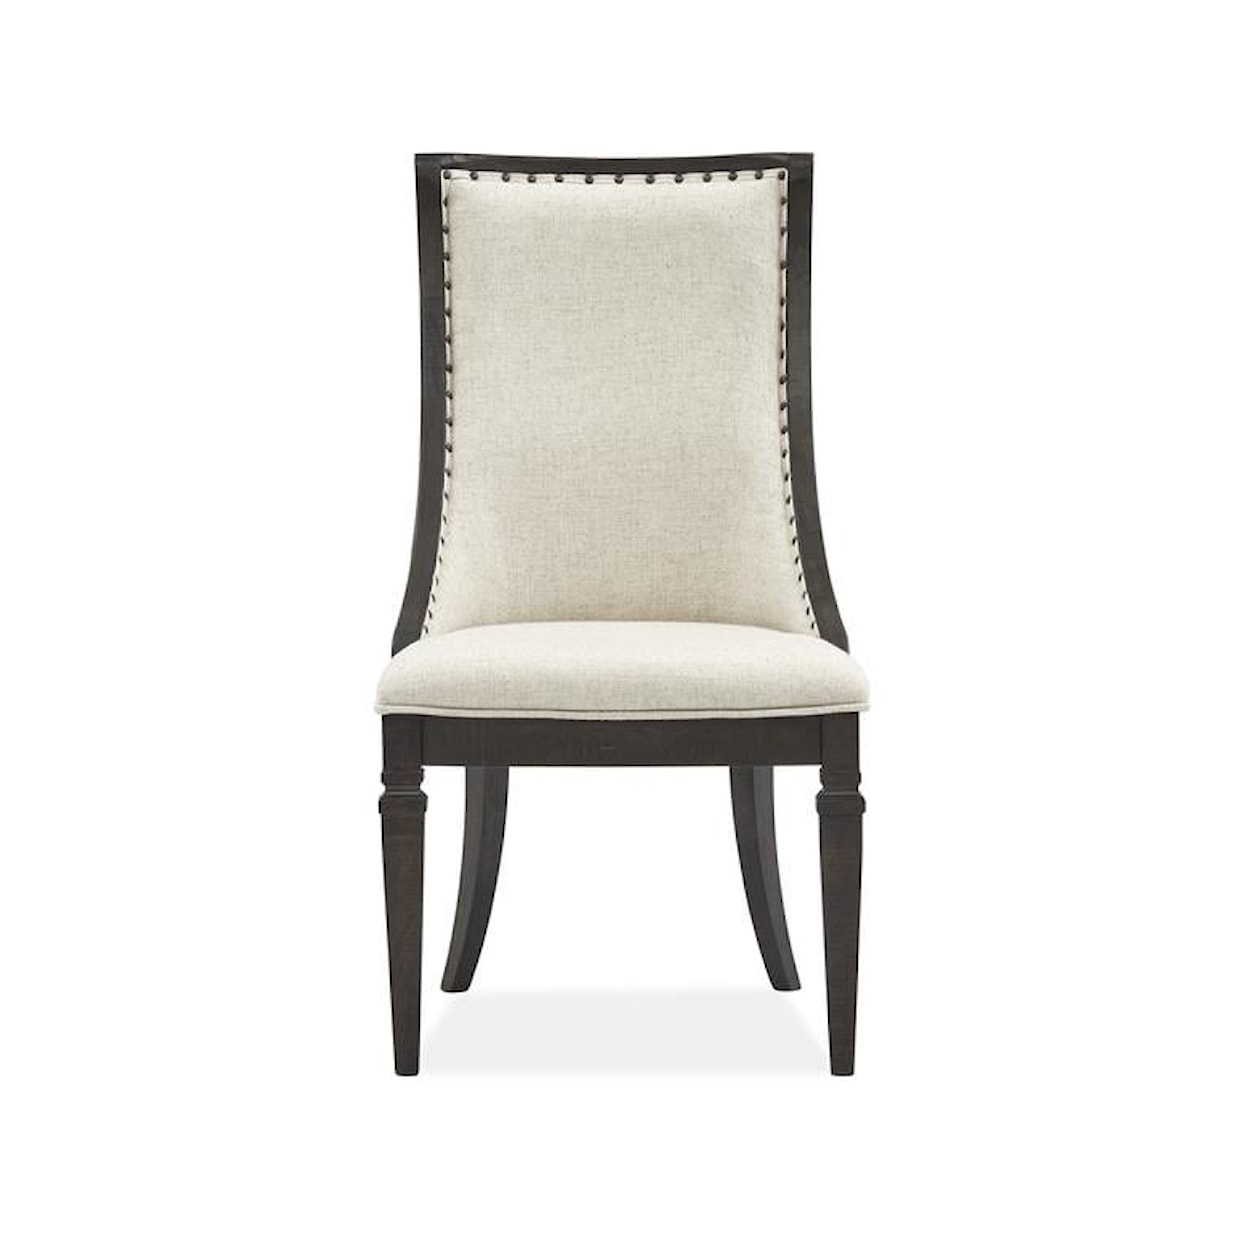 Belfort Select Solage Upholstered Dining Arm Chair 